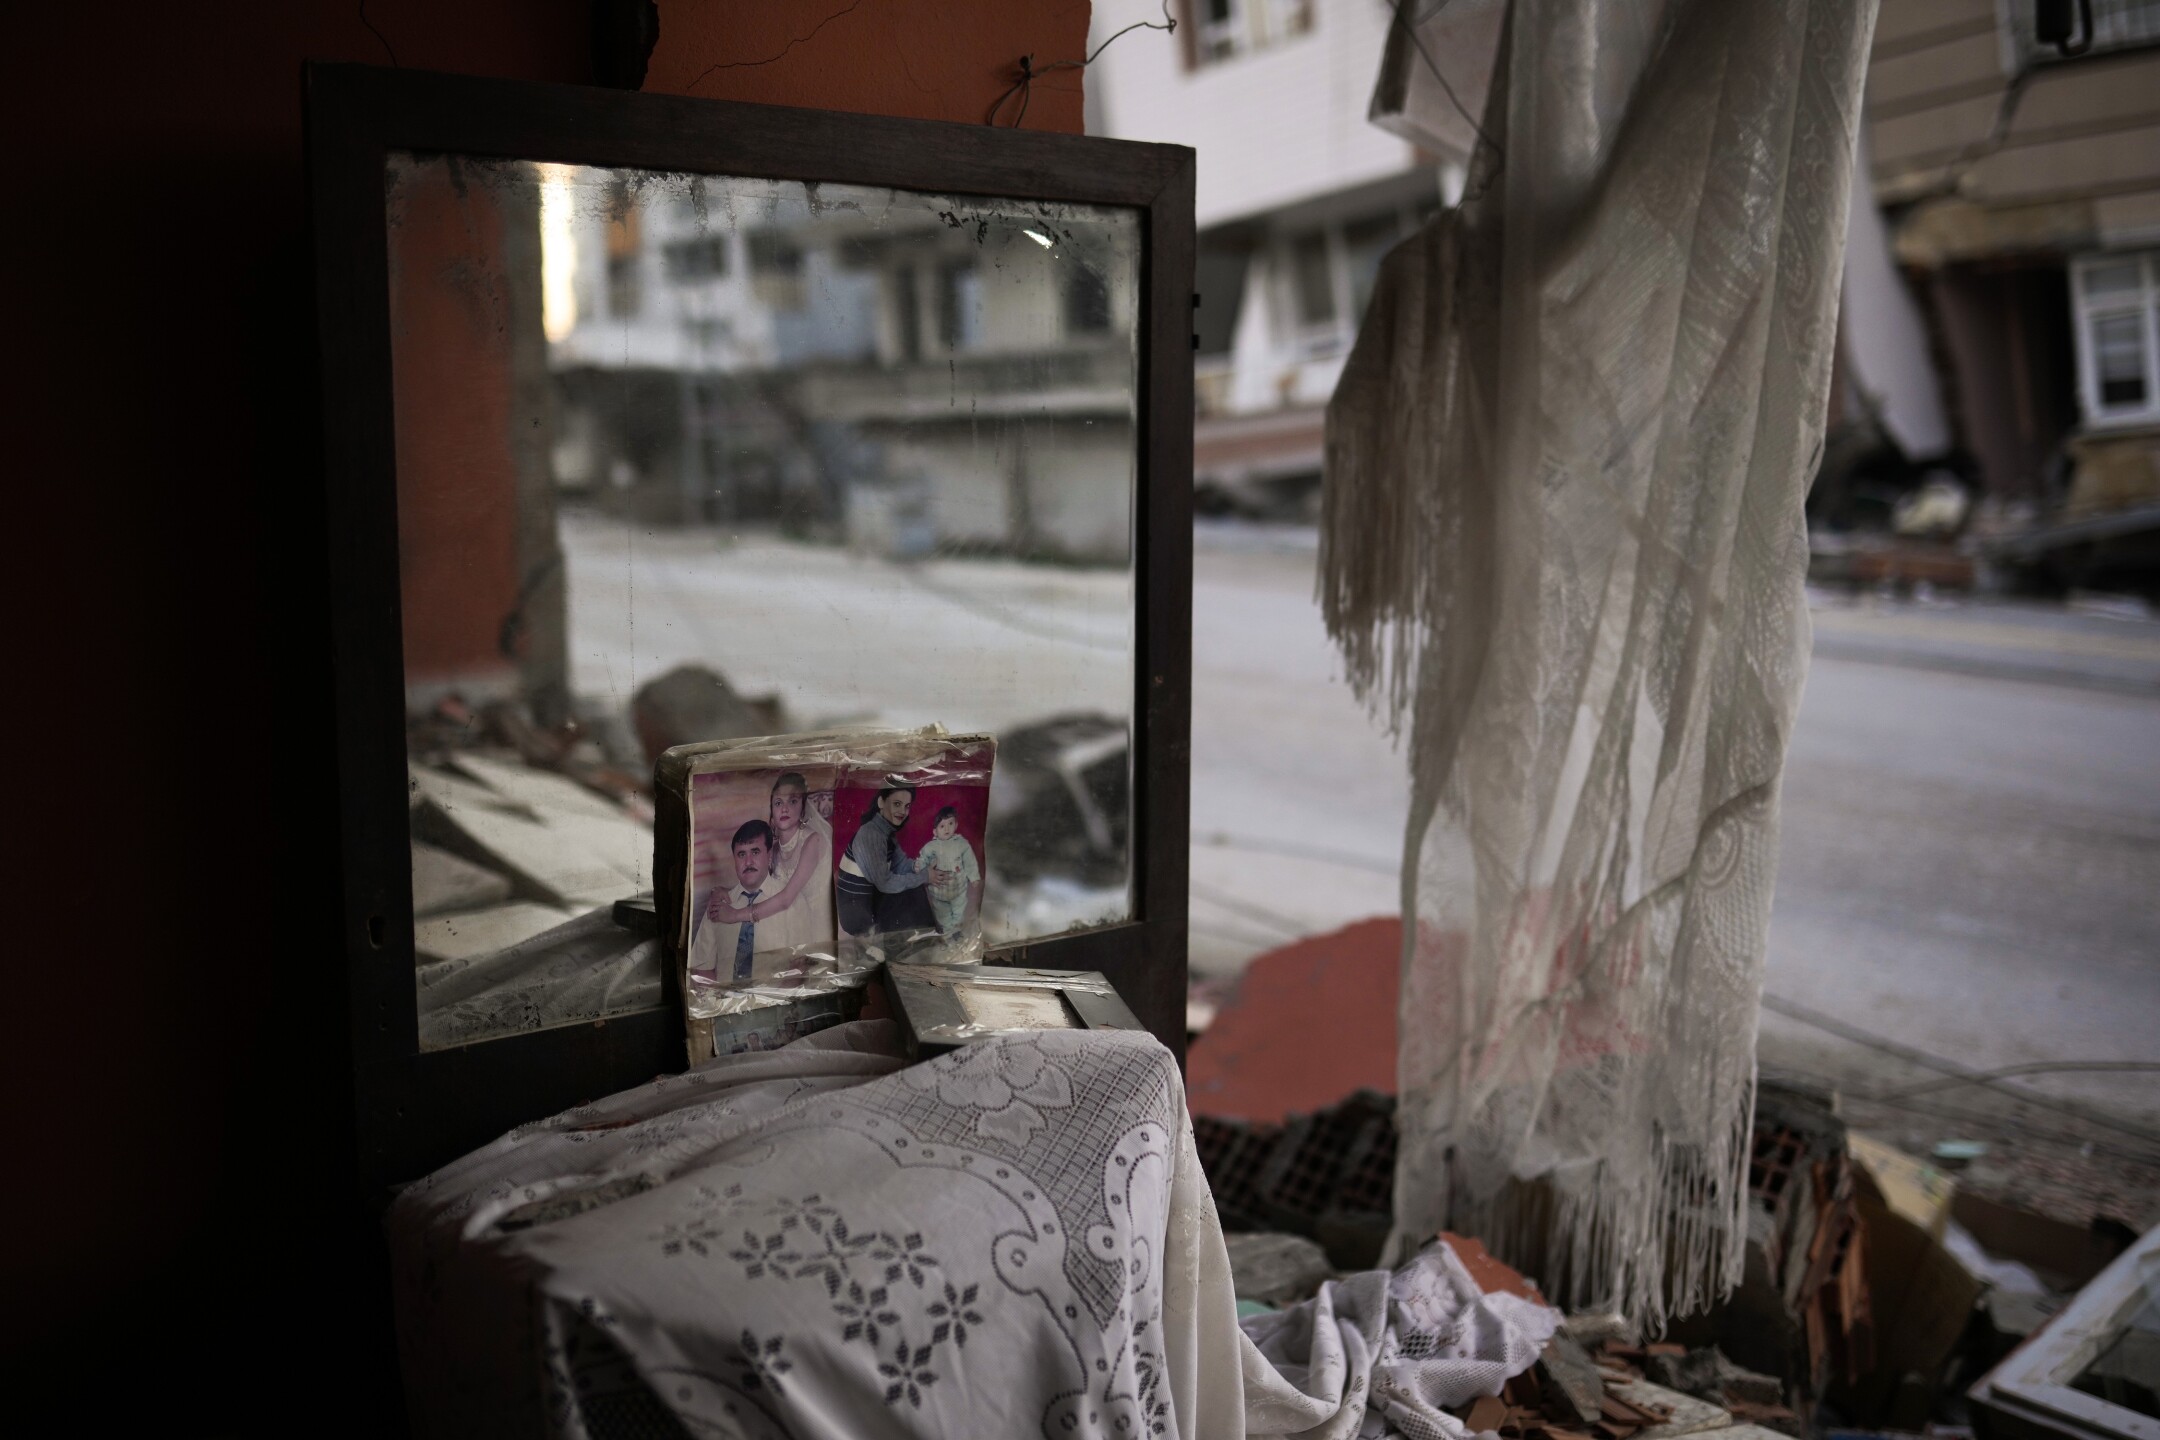 Photographs lean against a mirror in the room of a destroyed house in Samandag, southern Turkey, on Feb. 16, 2023, after the earthquake struck the area. (AP Photo/Francisco Seco)